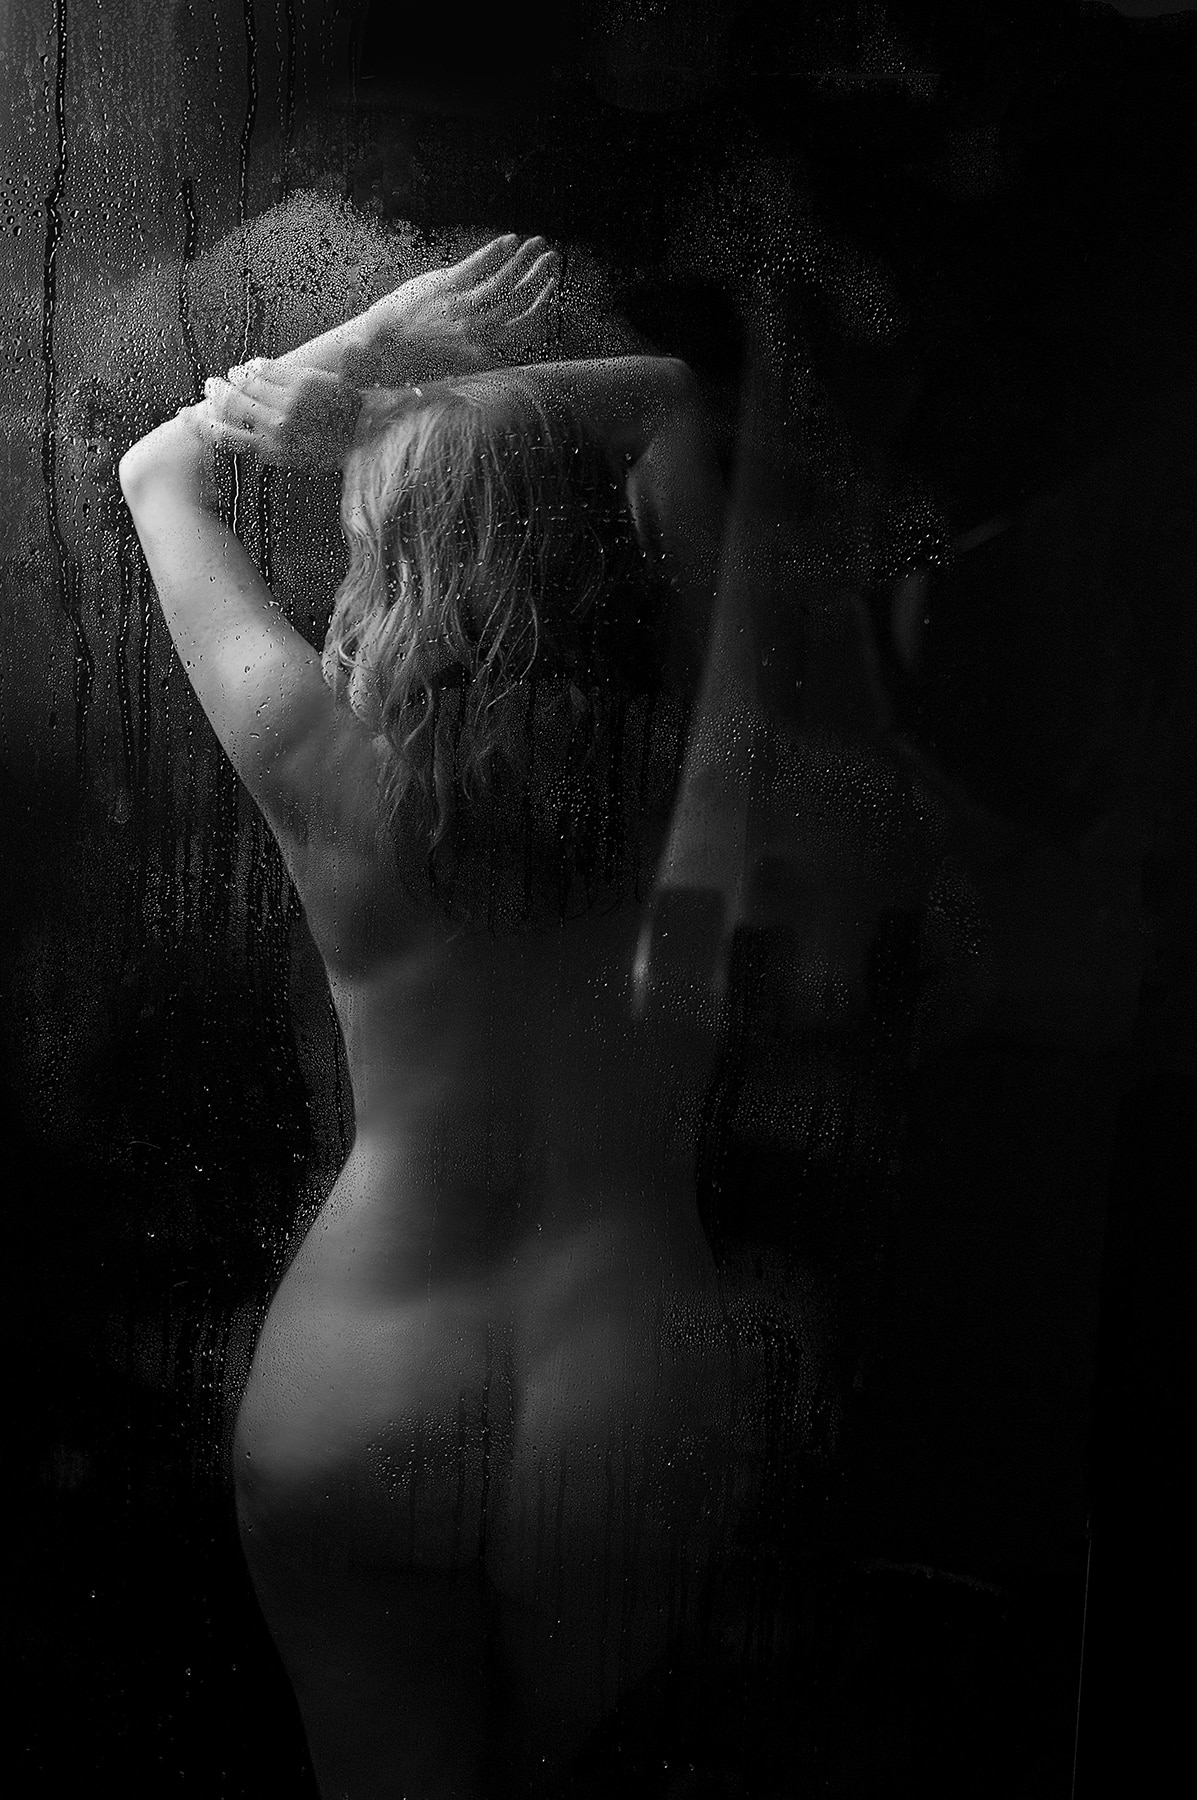 Woman does her boudoir session in a shower with Shannon Hemauer Photography, located in Carlisle PA.